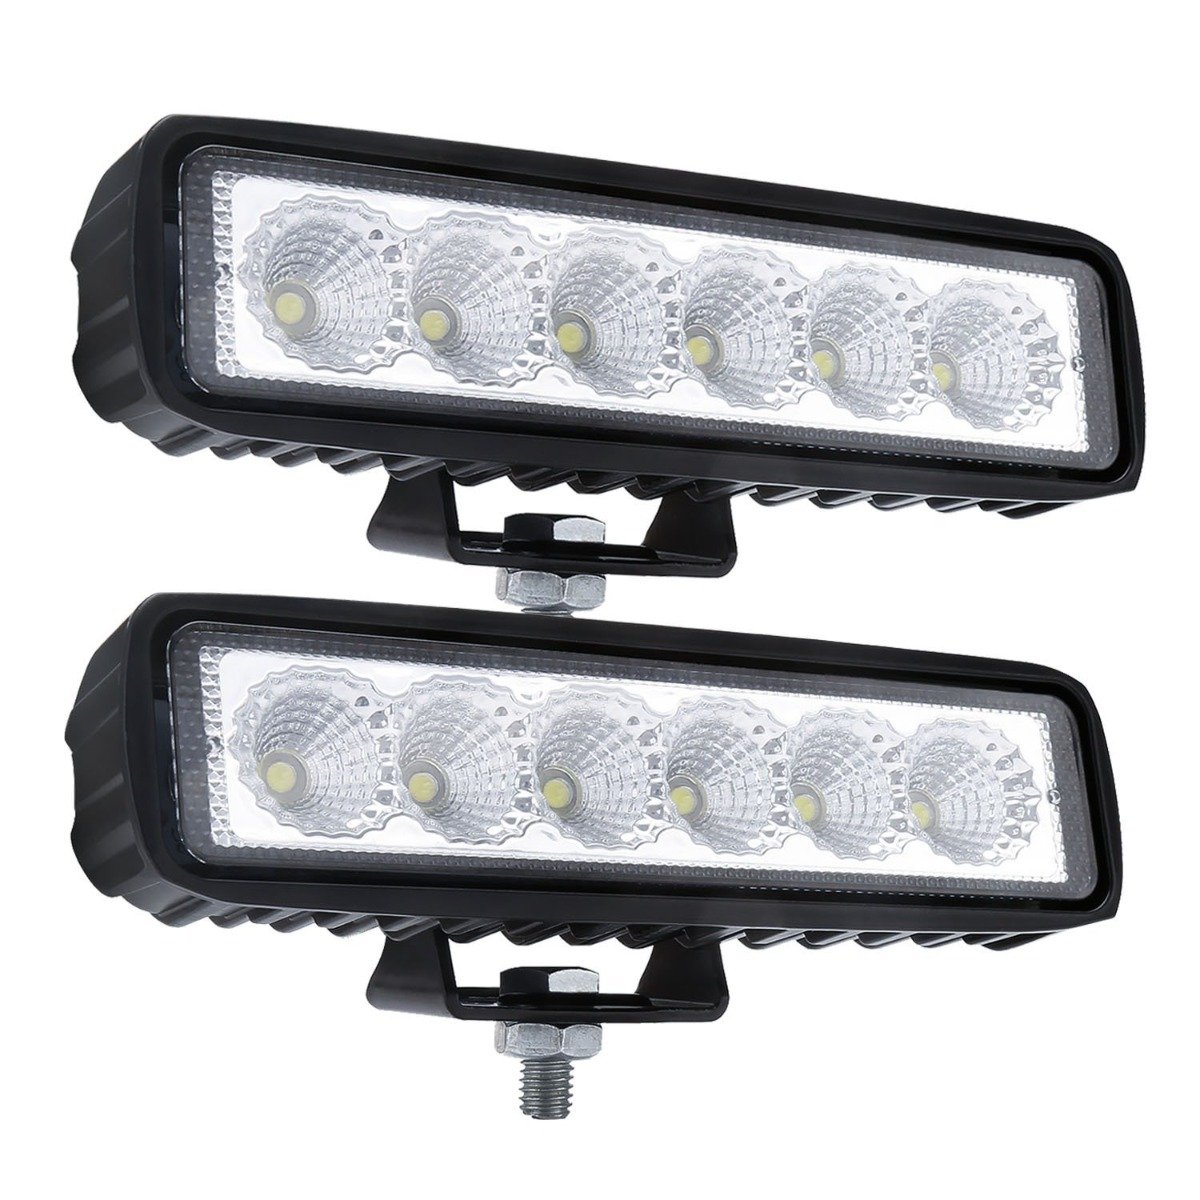 Fatherday-auto accessoirs 2 x 6inch 18W LED Work Light Bar Driving Lamp Flood Truck Offroad MINING UTE 4WD